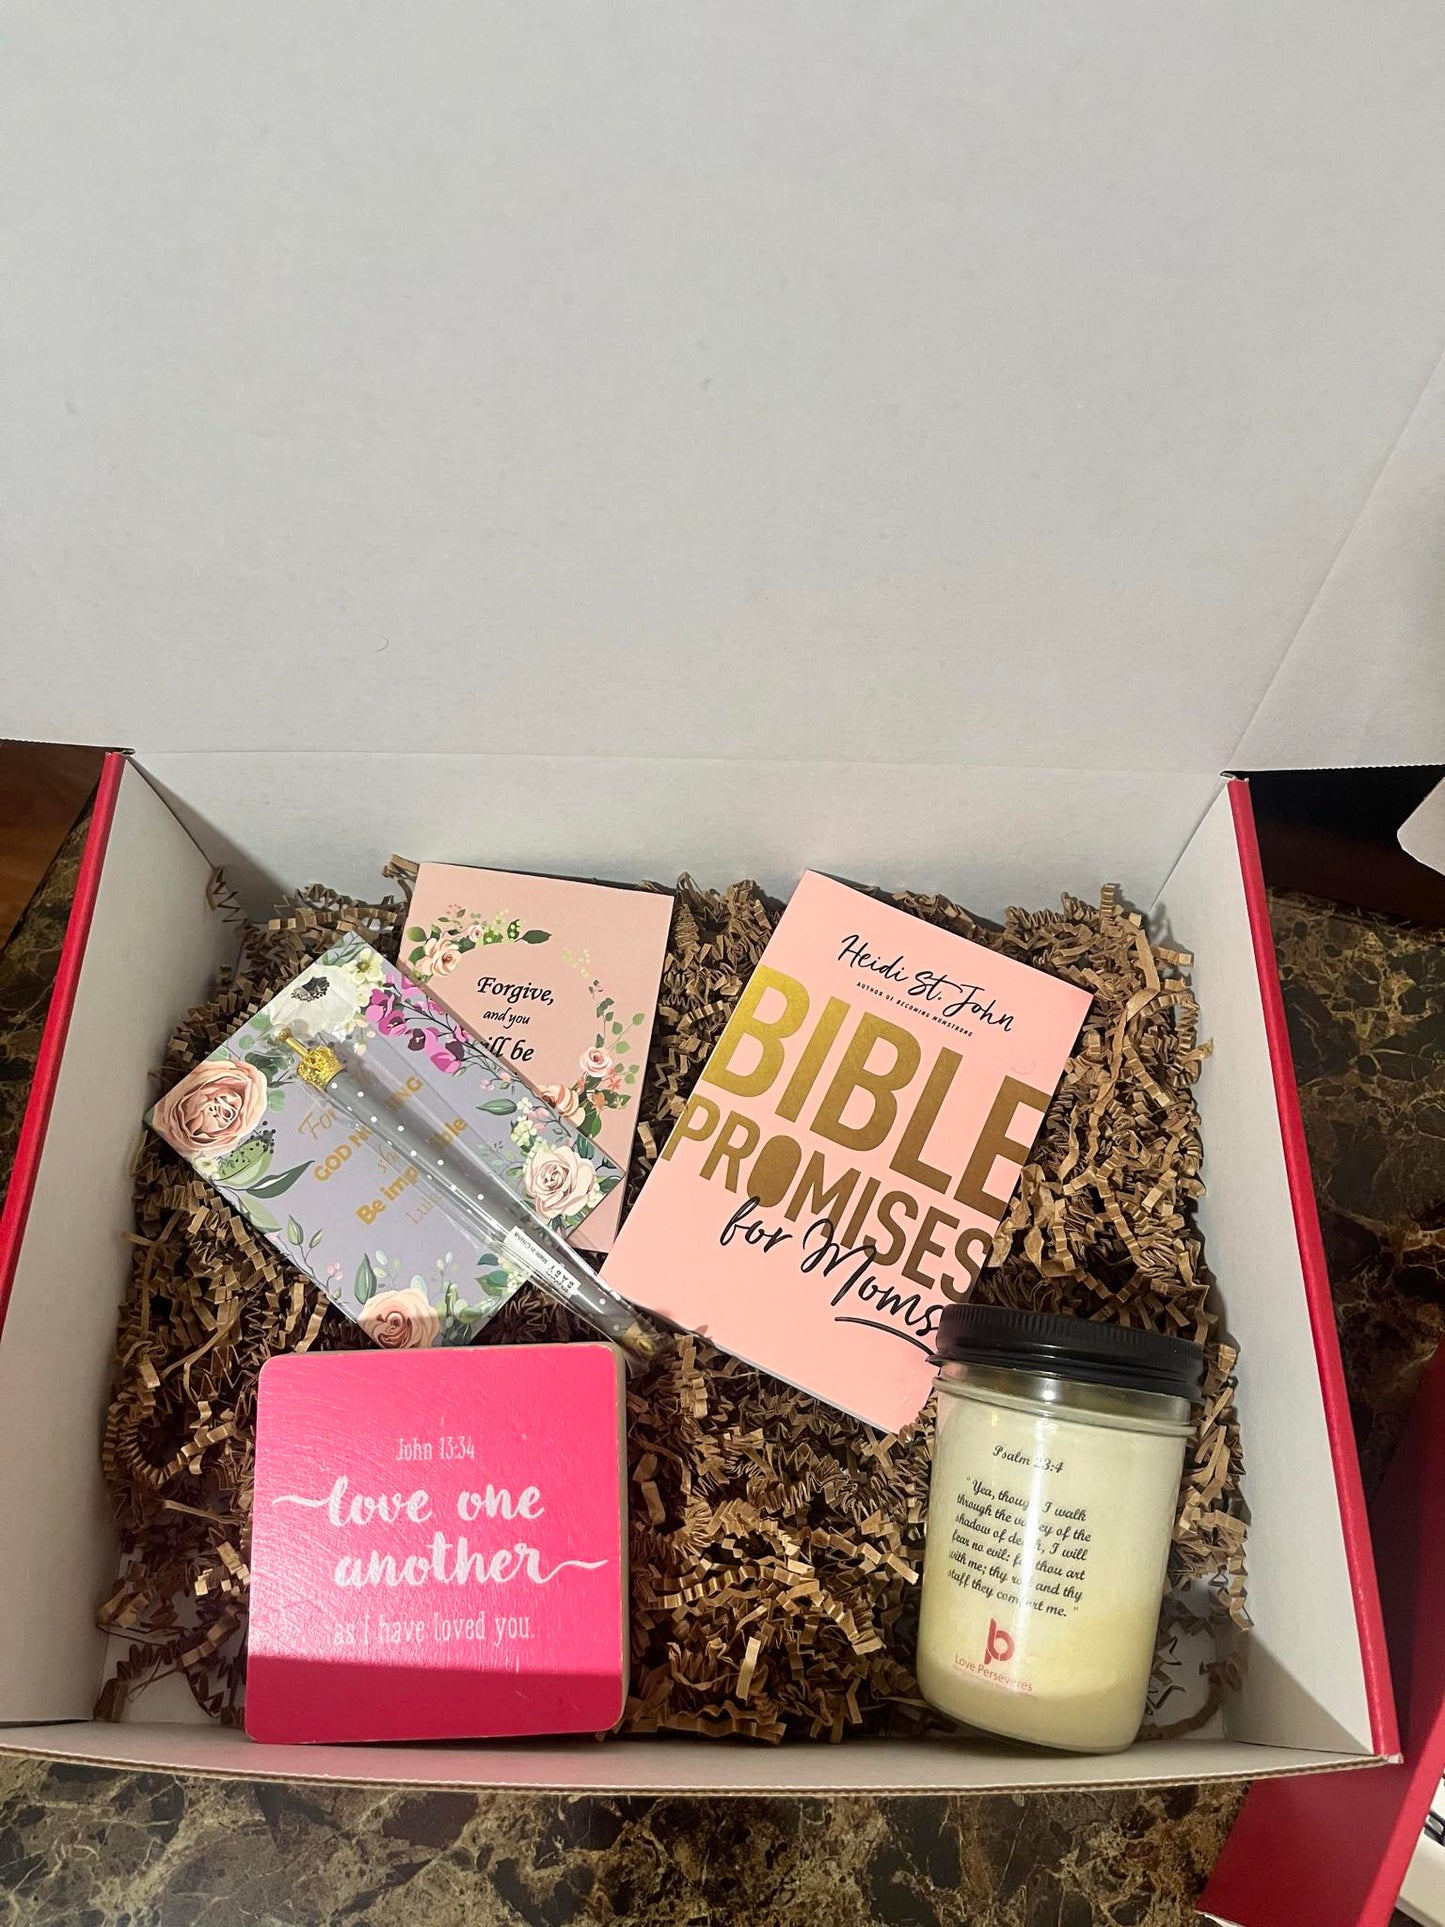 Christmas Edition Self Care & Encouragement In a Box As a Gift